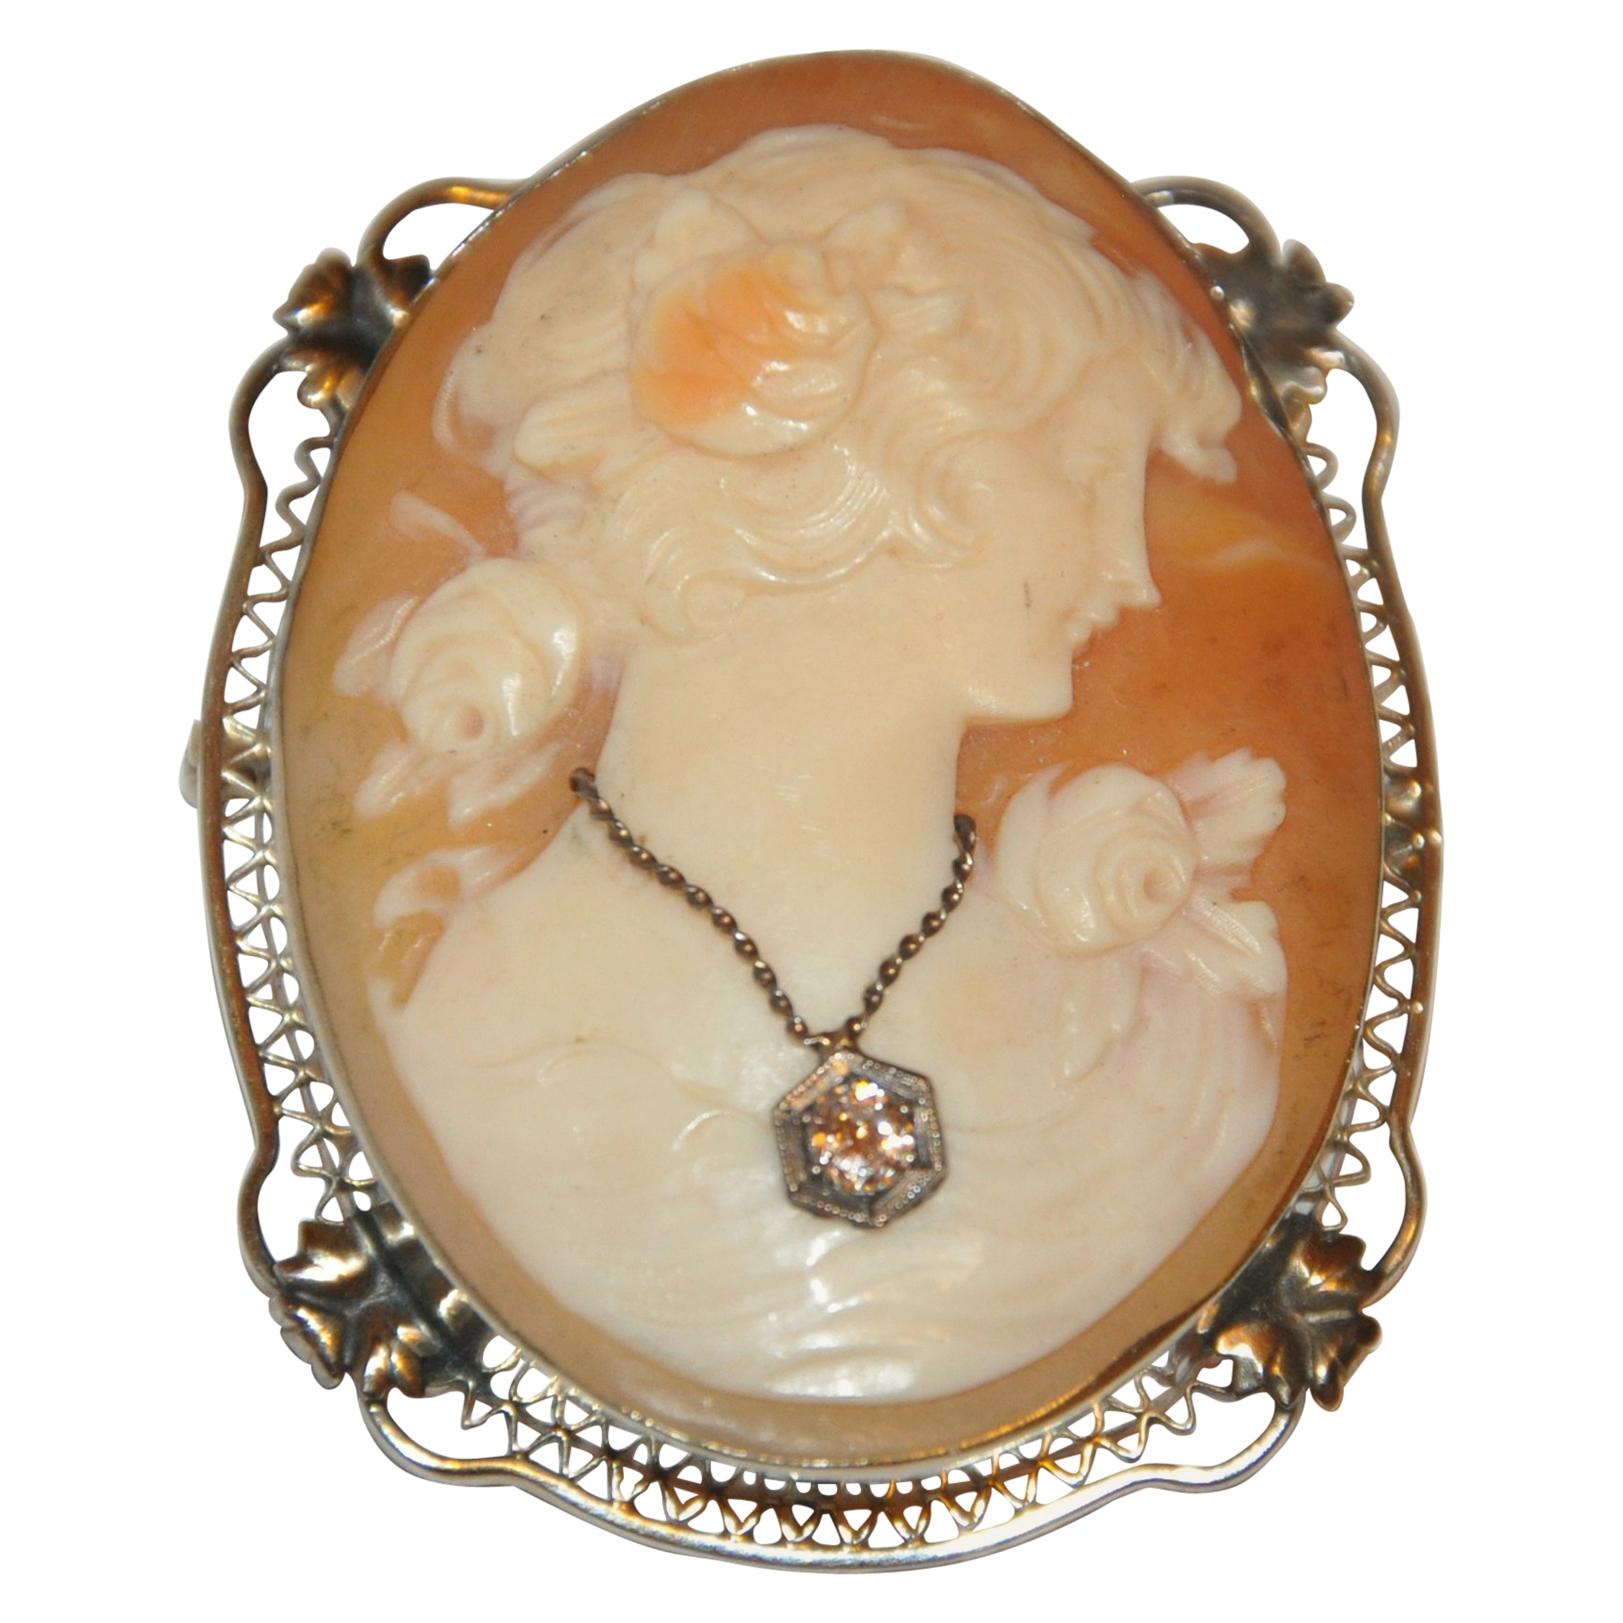 Exquisite Victorian 14K Yellow Gold Filigree Cameo with Diamond Pendant/Brooch